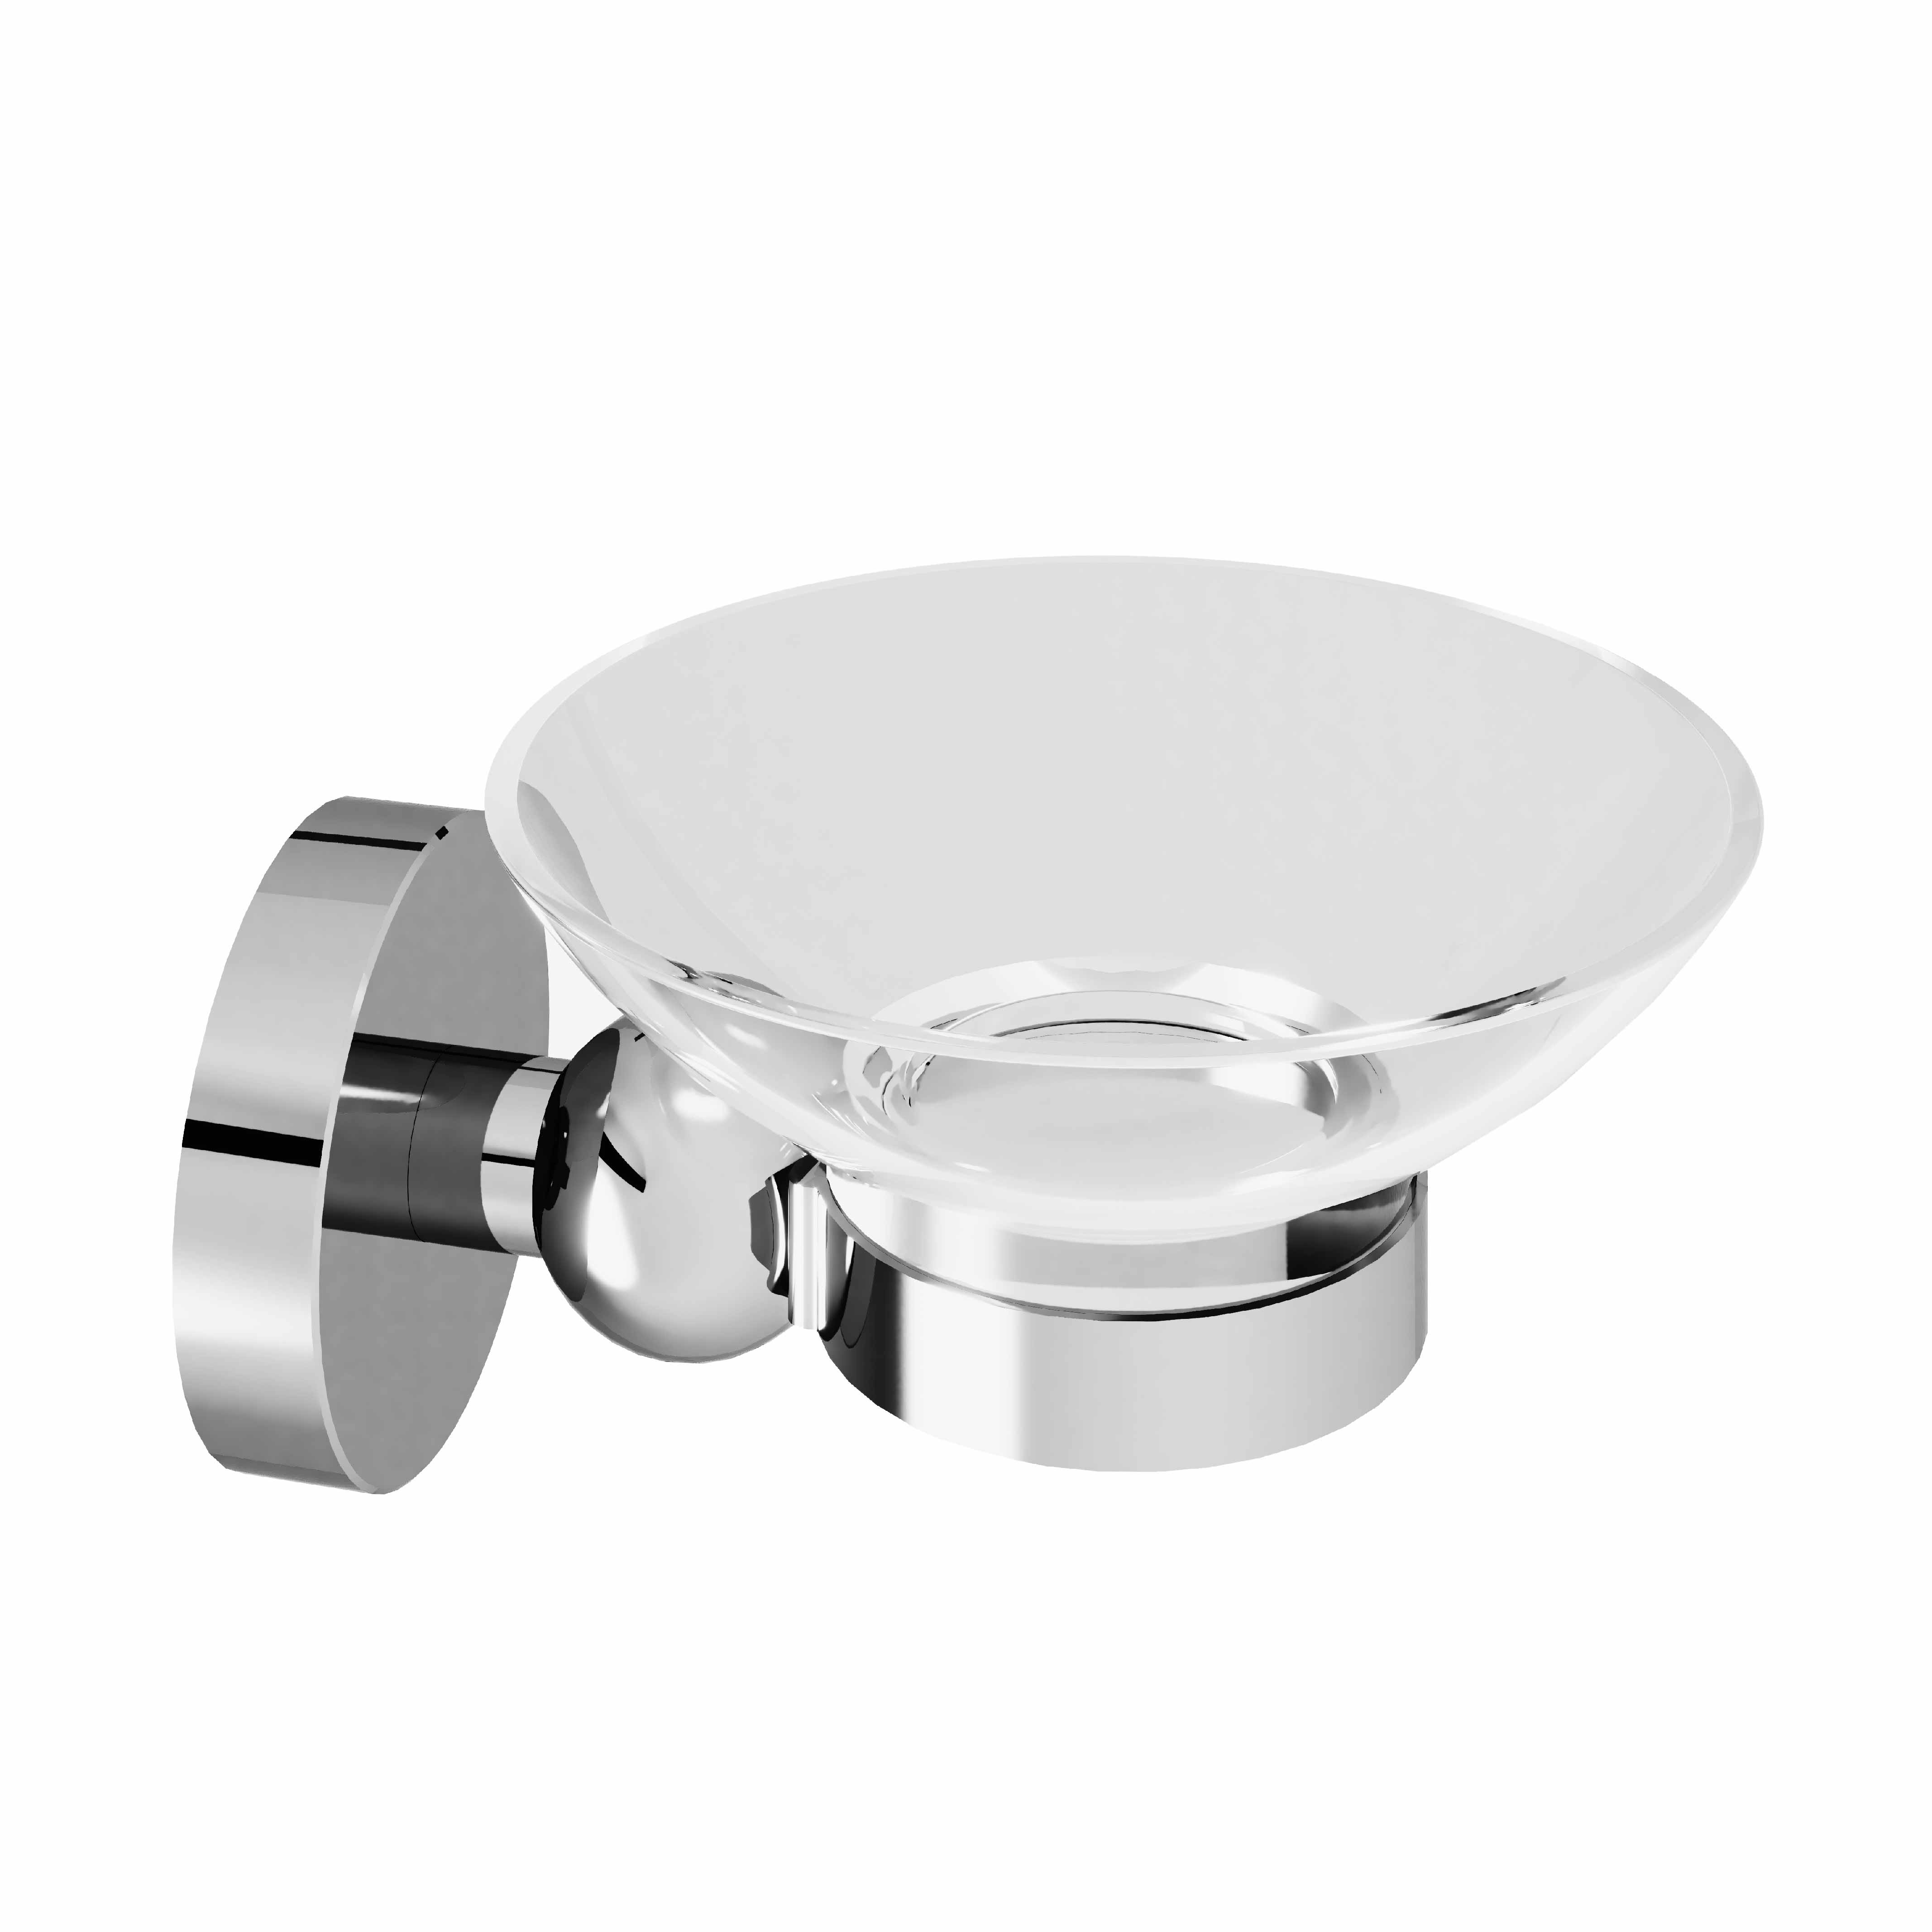 M90-515 Wall mounted soap dish holder